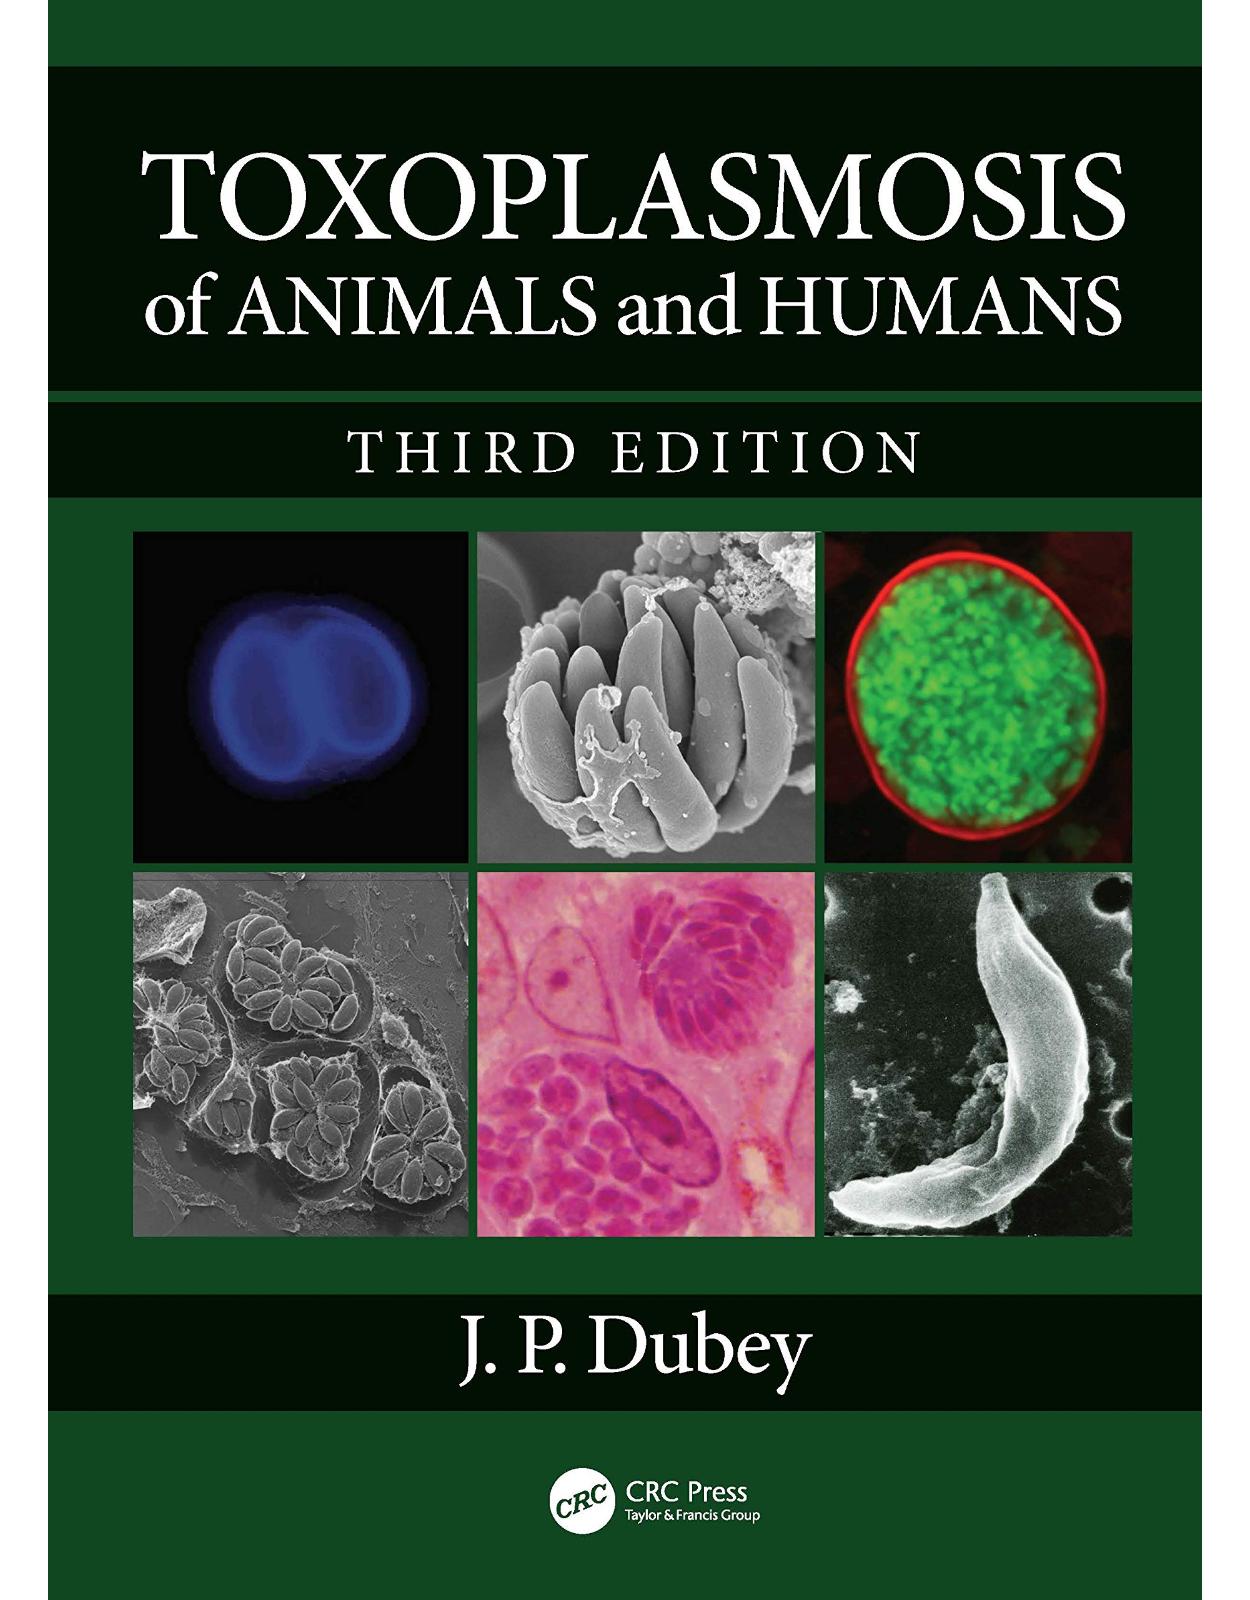 Toxoplasmosis of Animals and Humans